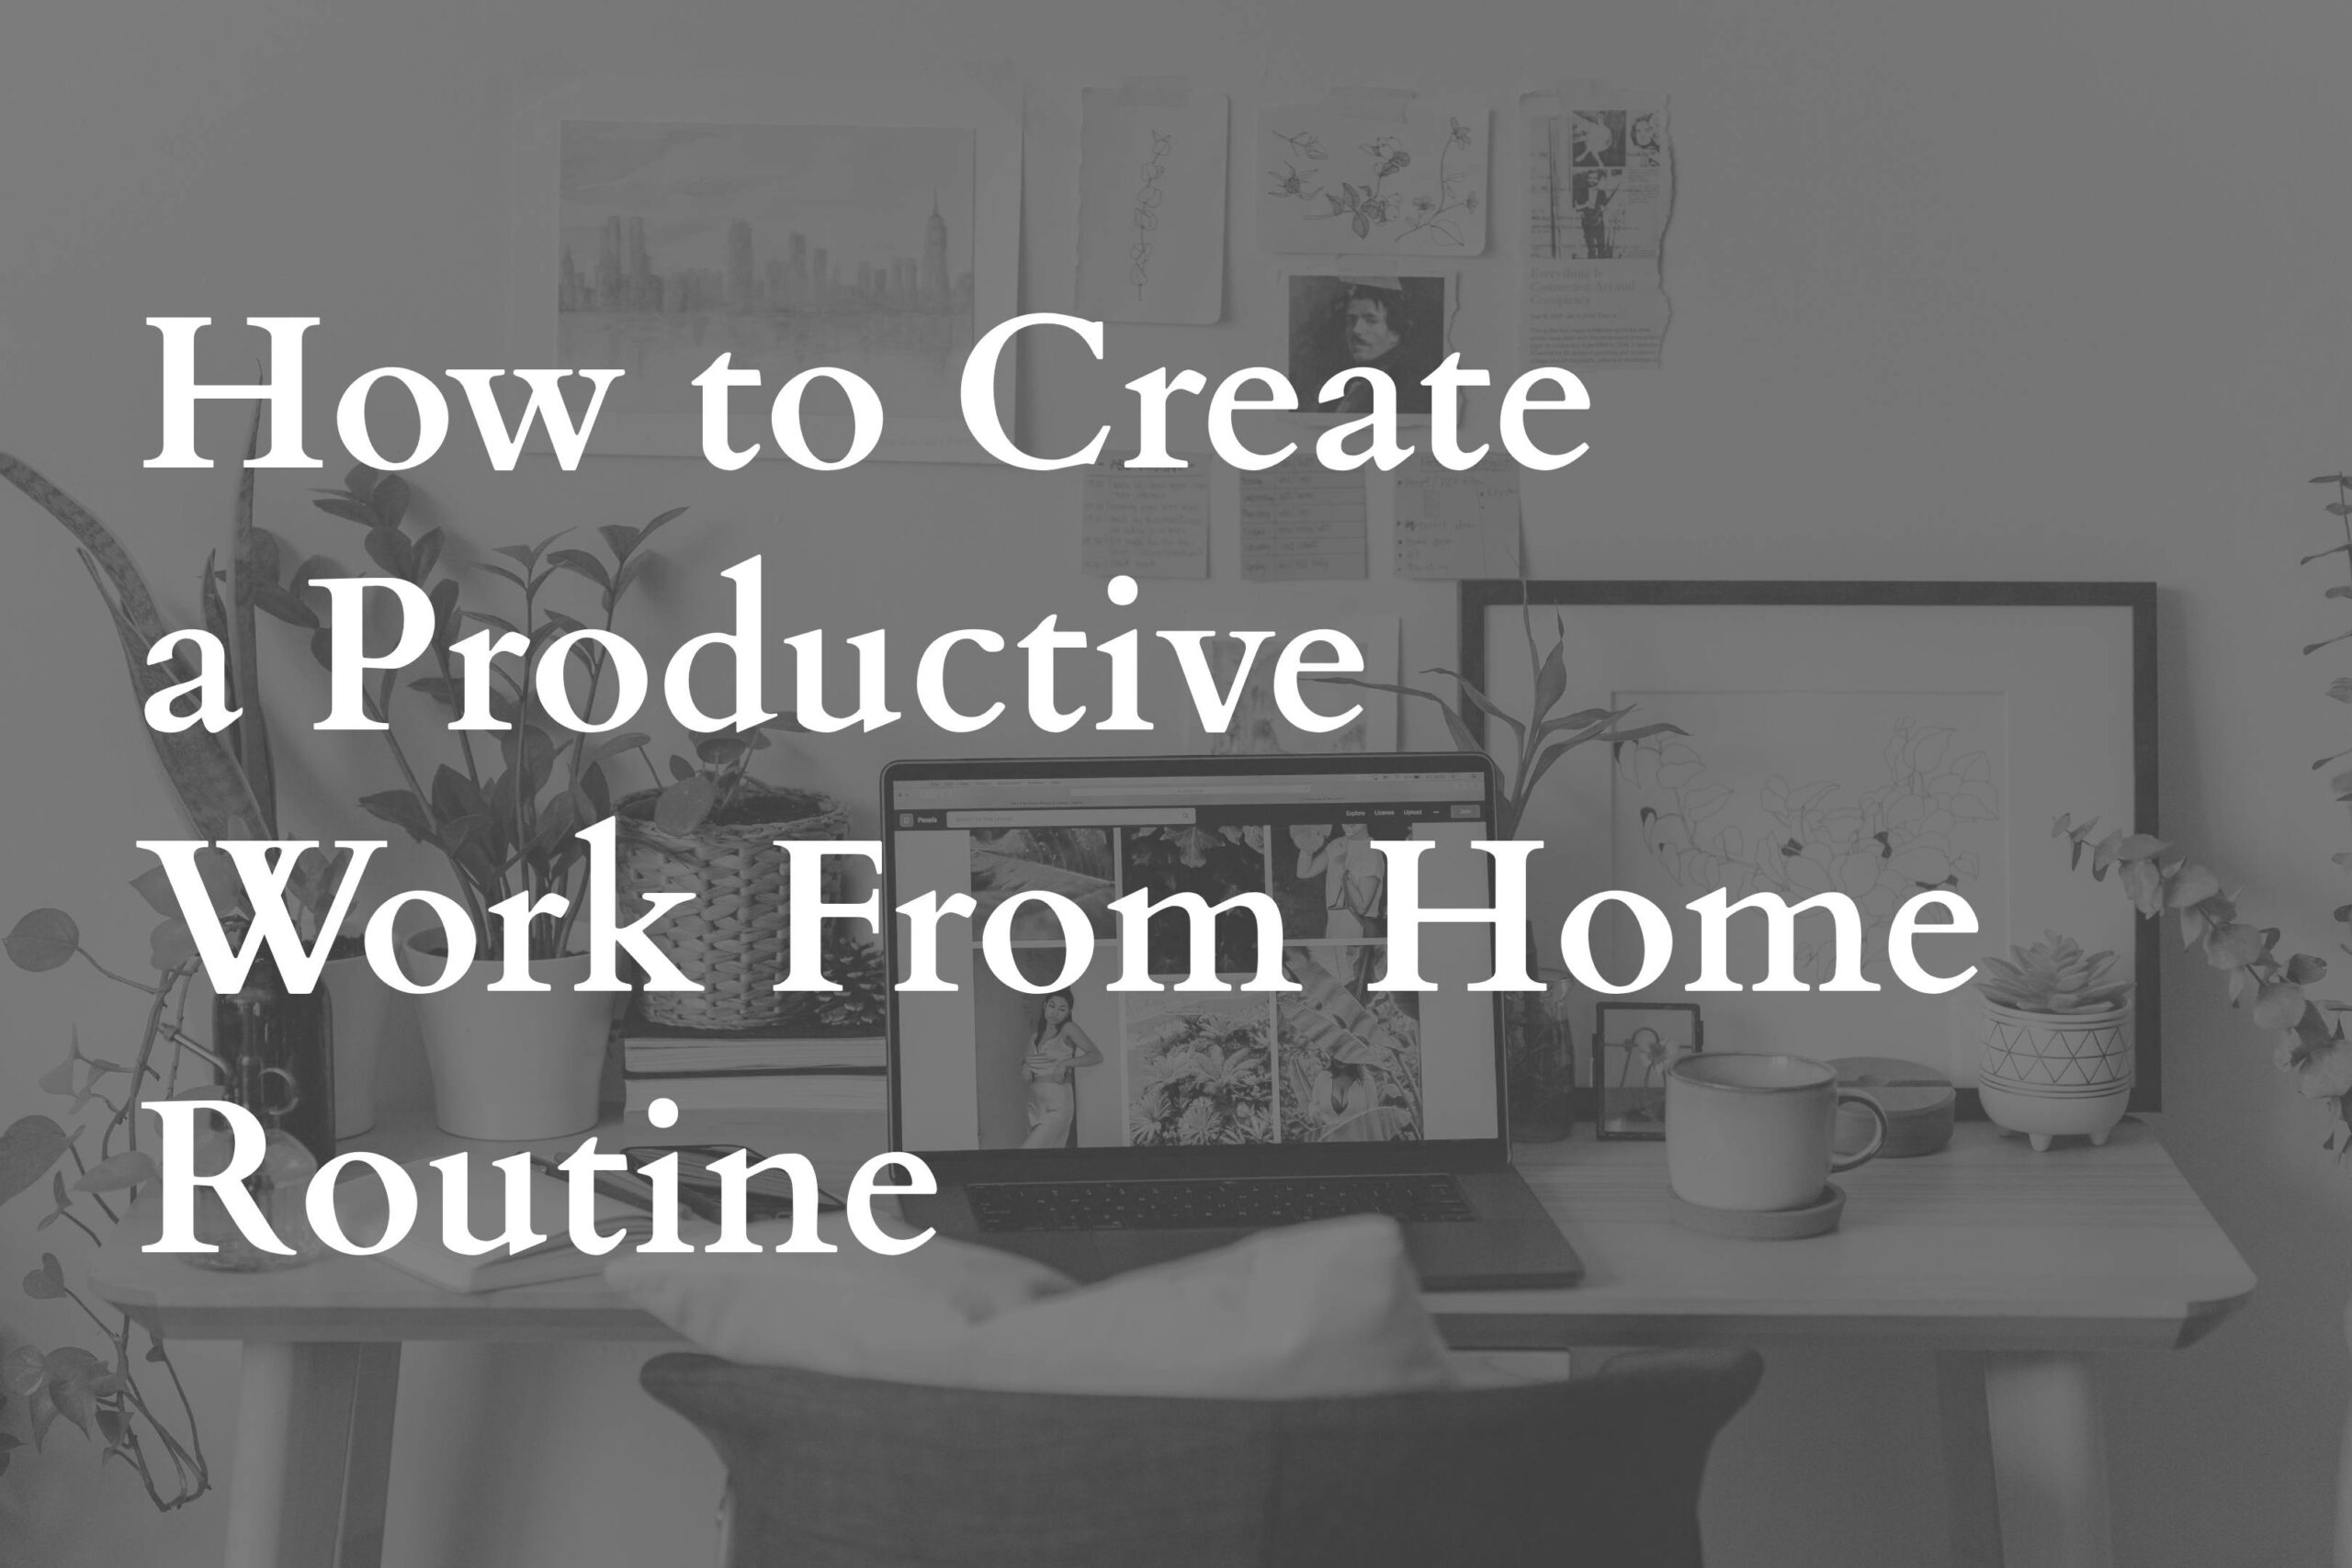 How to Create a Productive Work Routine